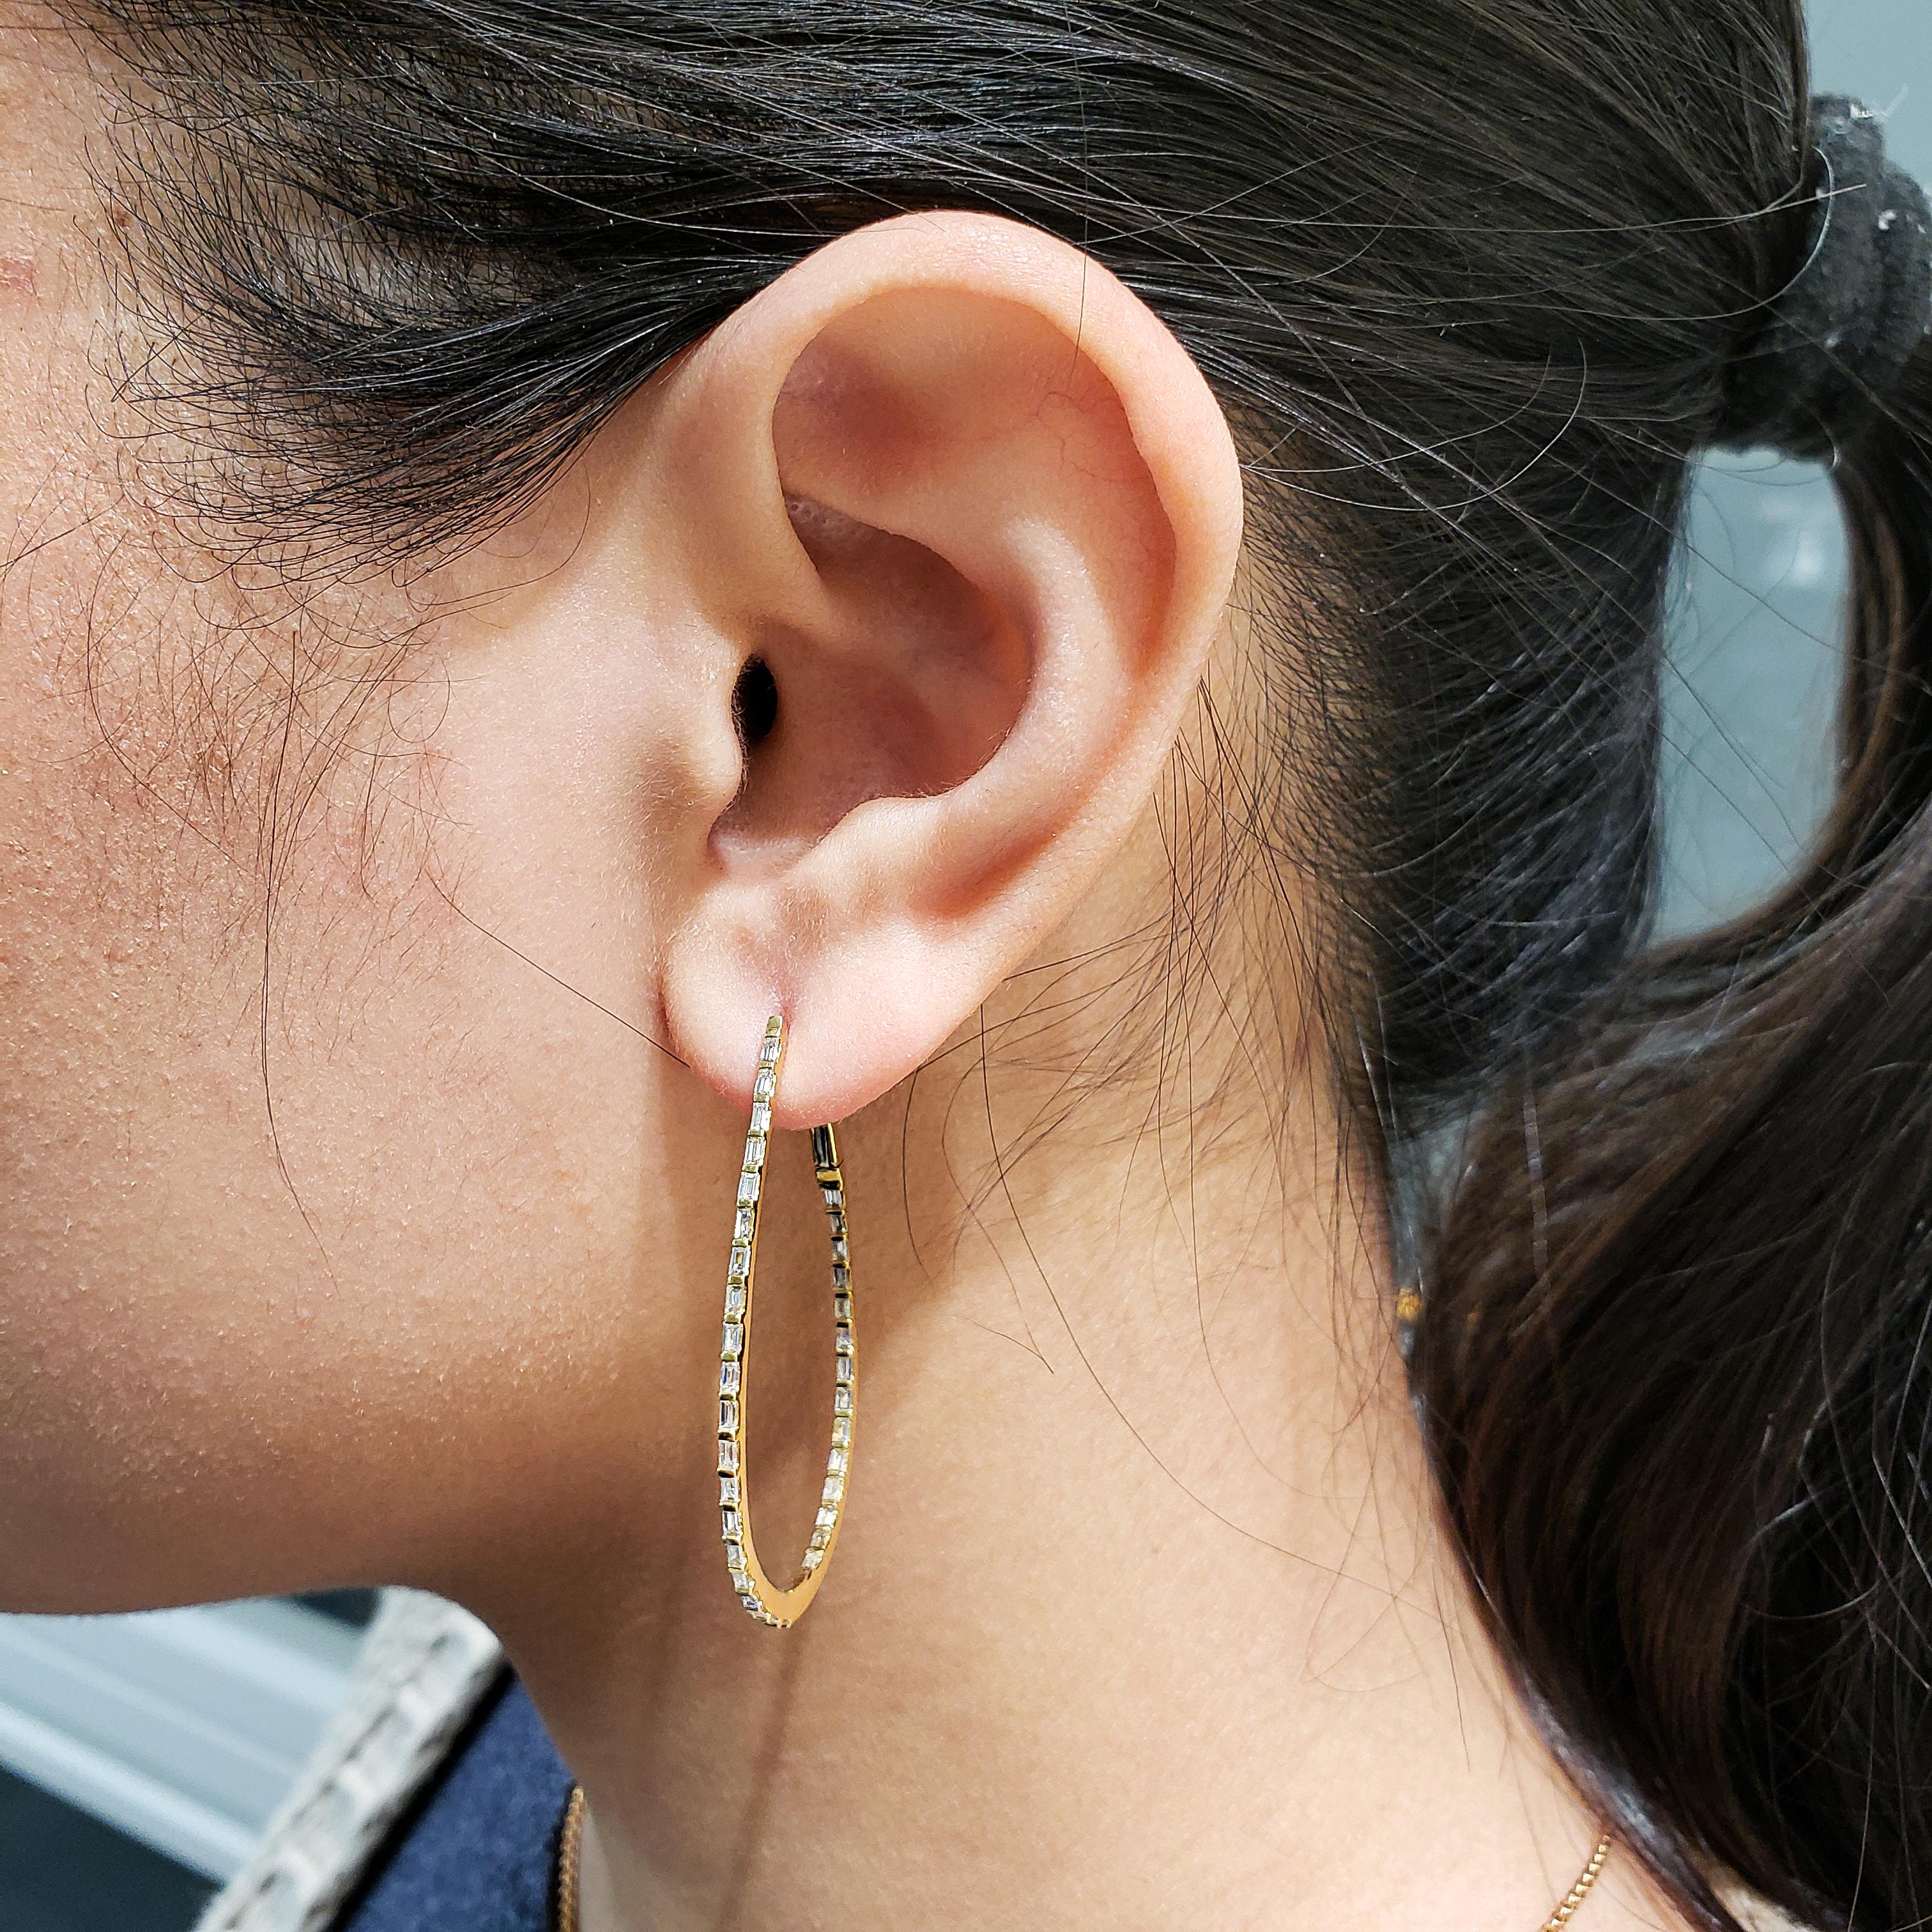 A unique and stylish pair of hoop earrings showcasing a row of baguette diamonds, Bar set in a tear drop hoop design. Diamonds weigh 0.98 carats total. Made in 18 karat yellow gold.

Roman Malakov is a custom house, specializing in creating anything